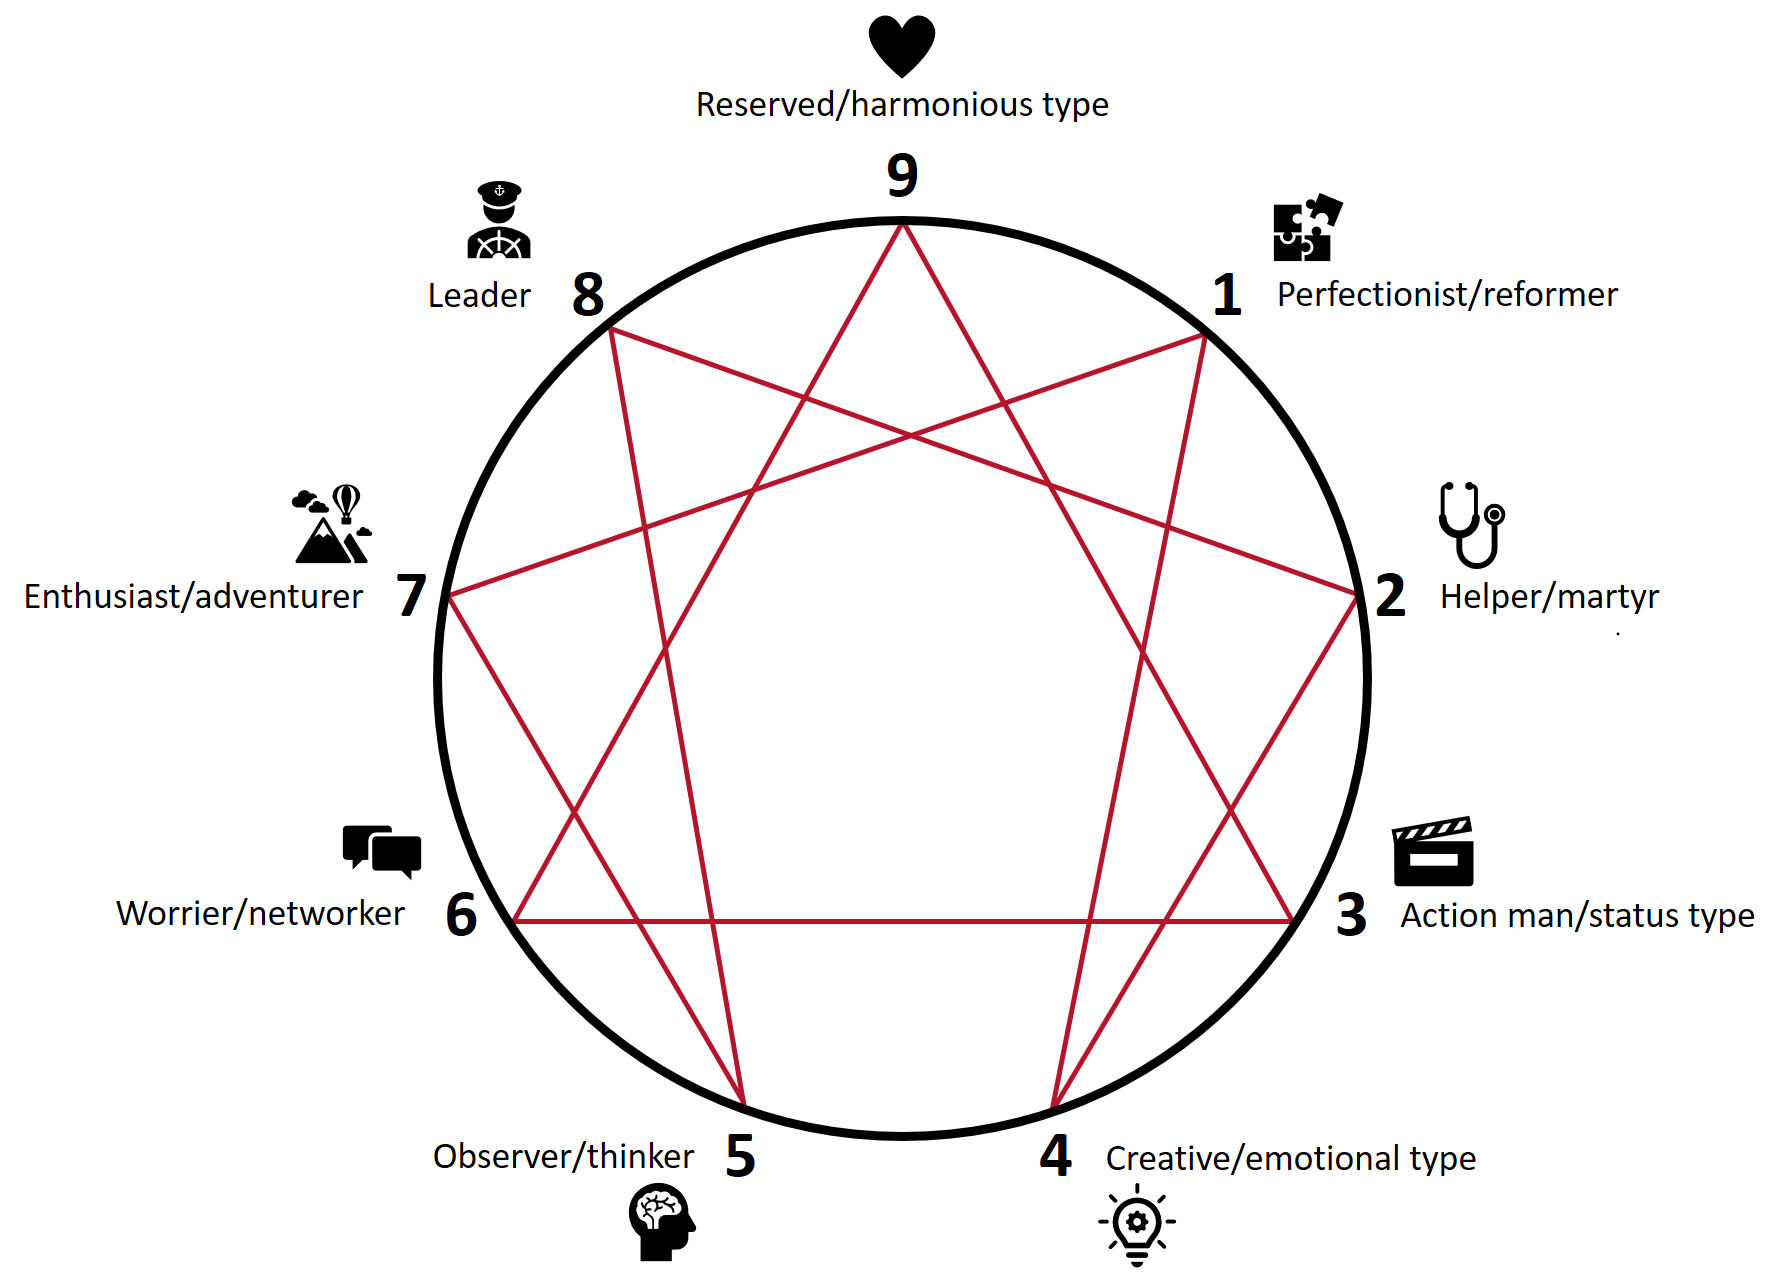 The Enneagram is a personality model which consists of nine personality types.